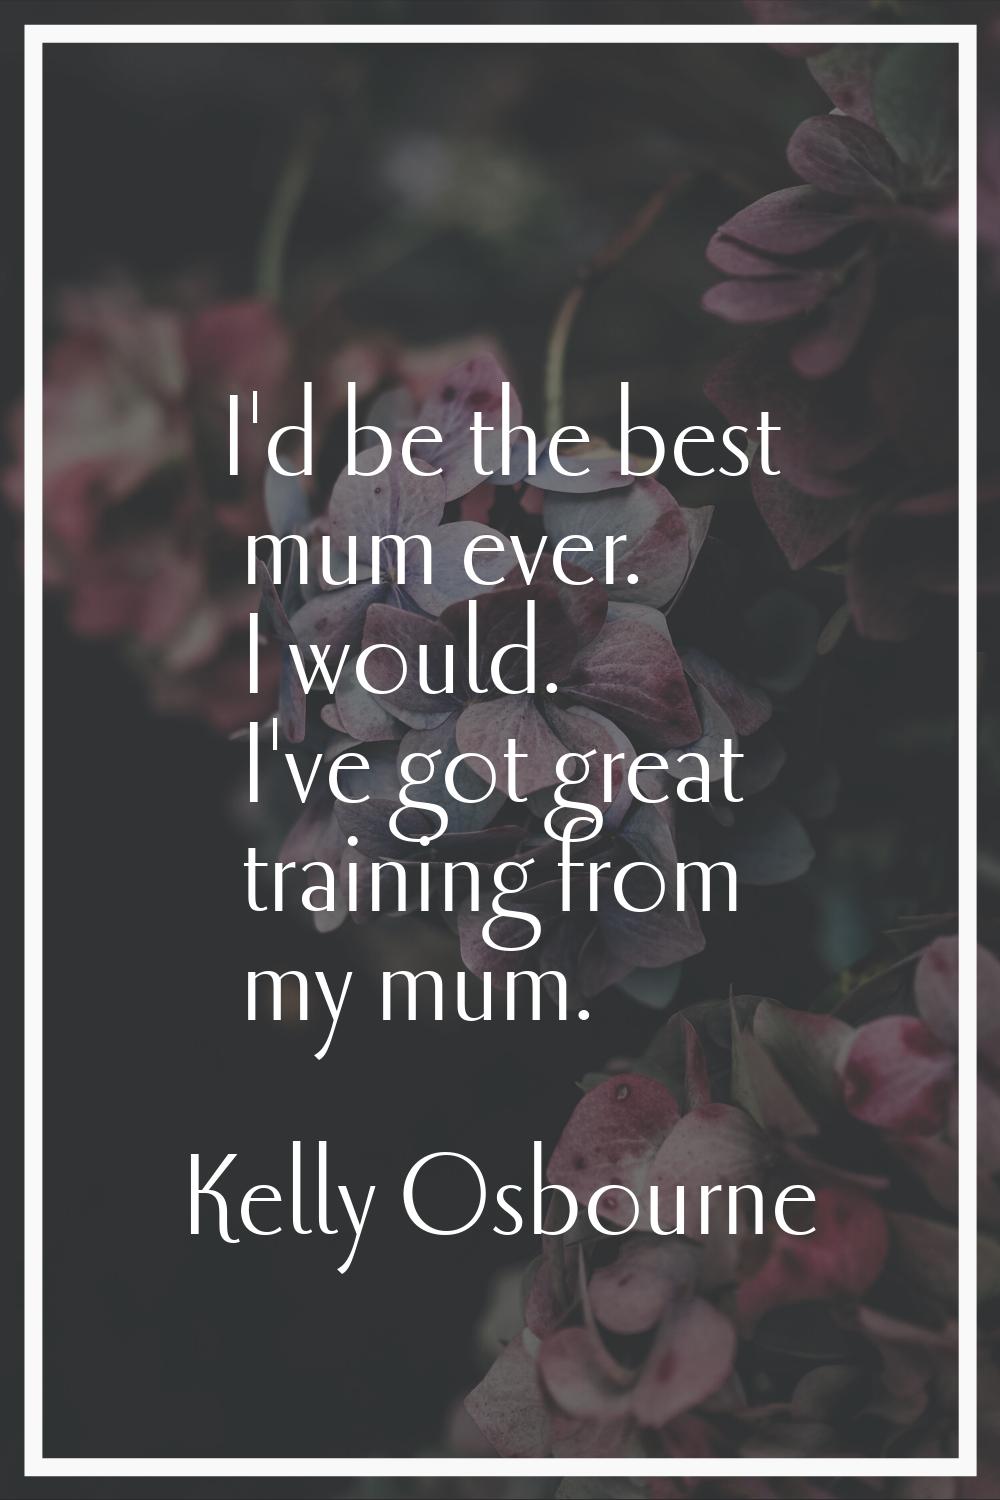 I'd be the best mum ever. I would. I've got great training from my mum.